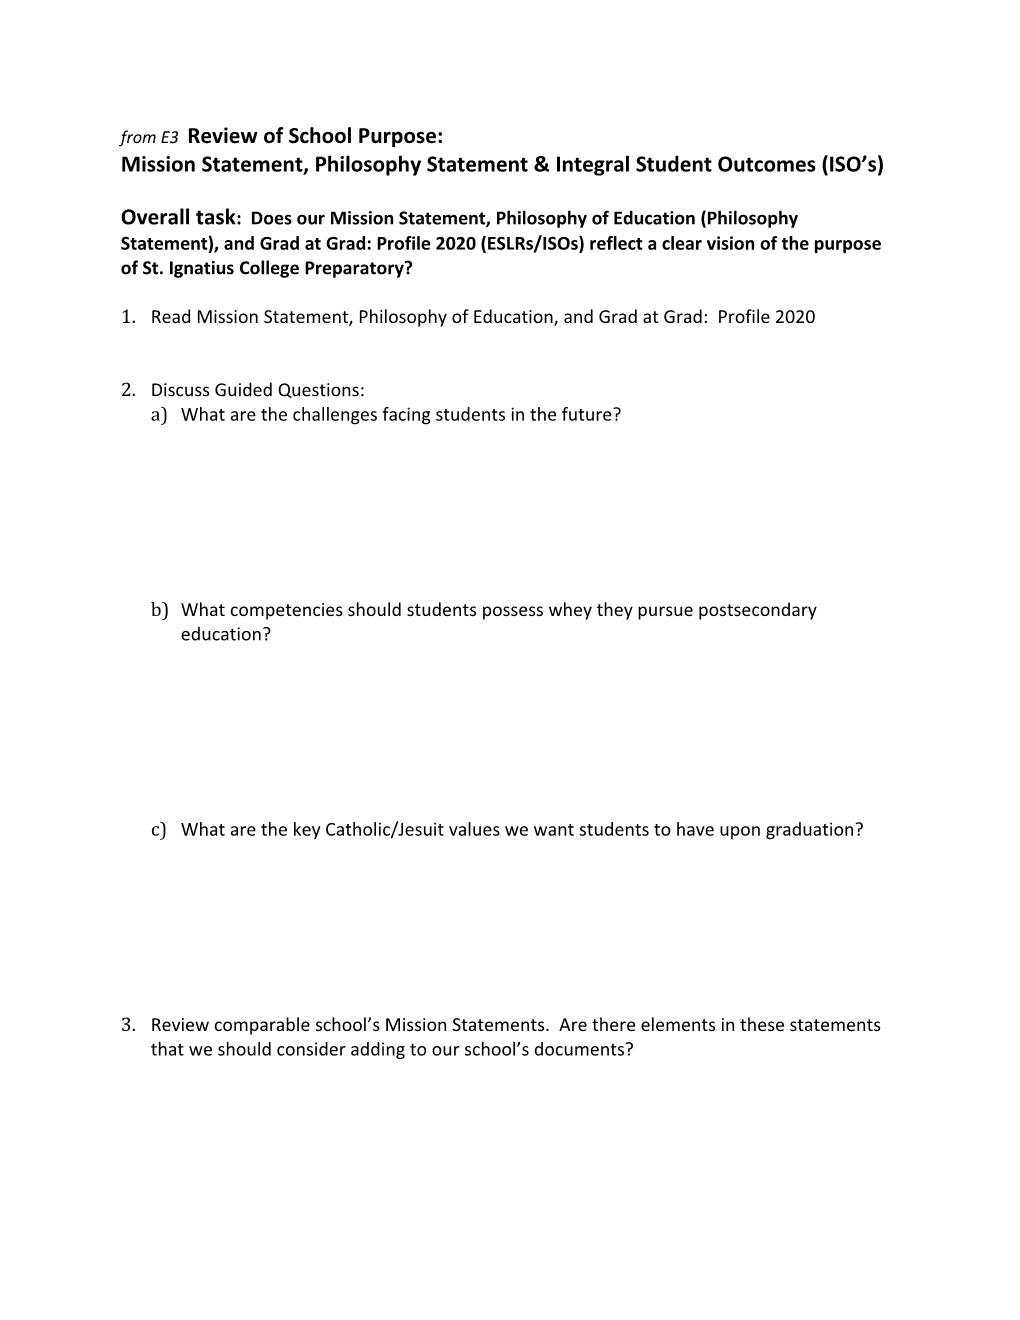 Mission Statement, Philosophy Statement & Integral Student Outcomes (ISO S)